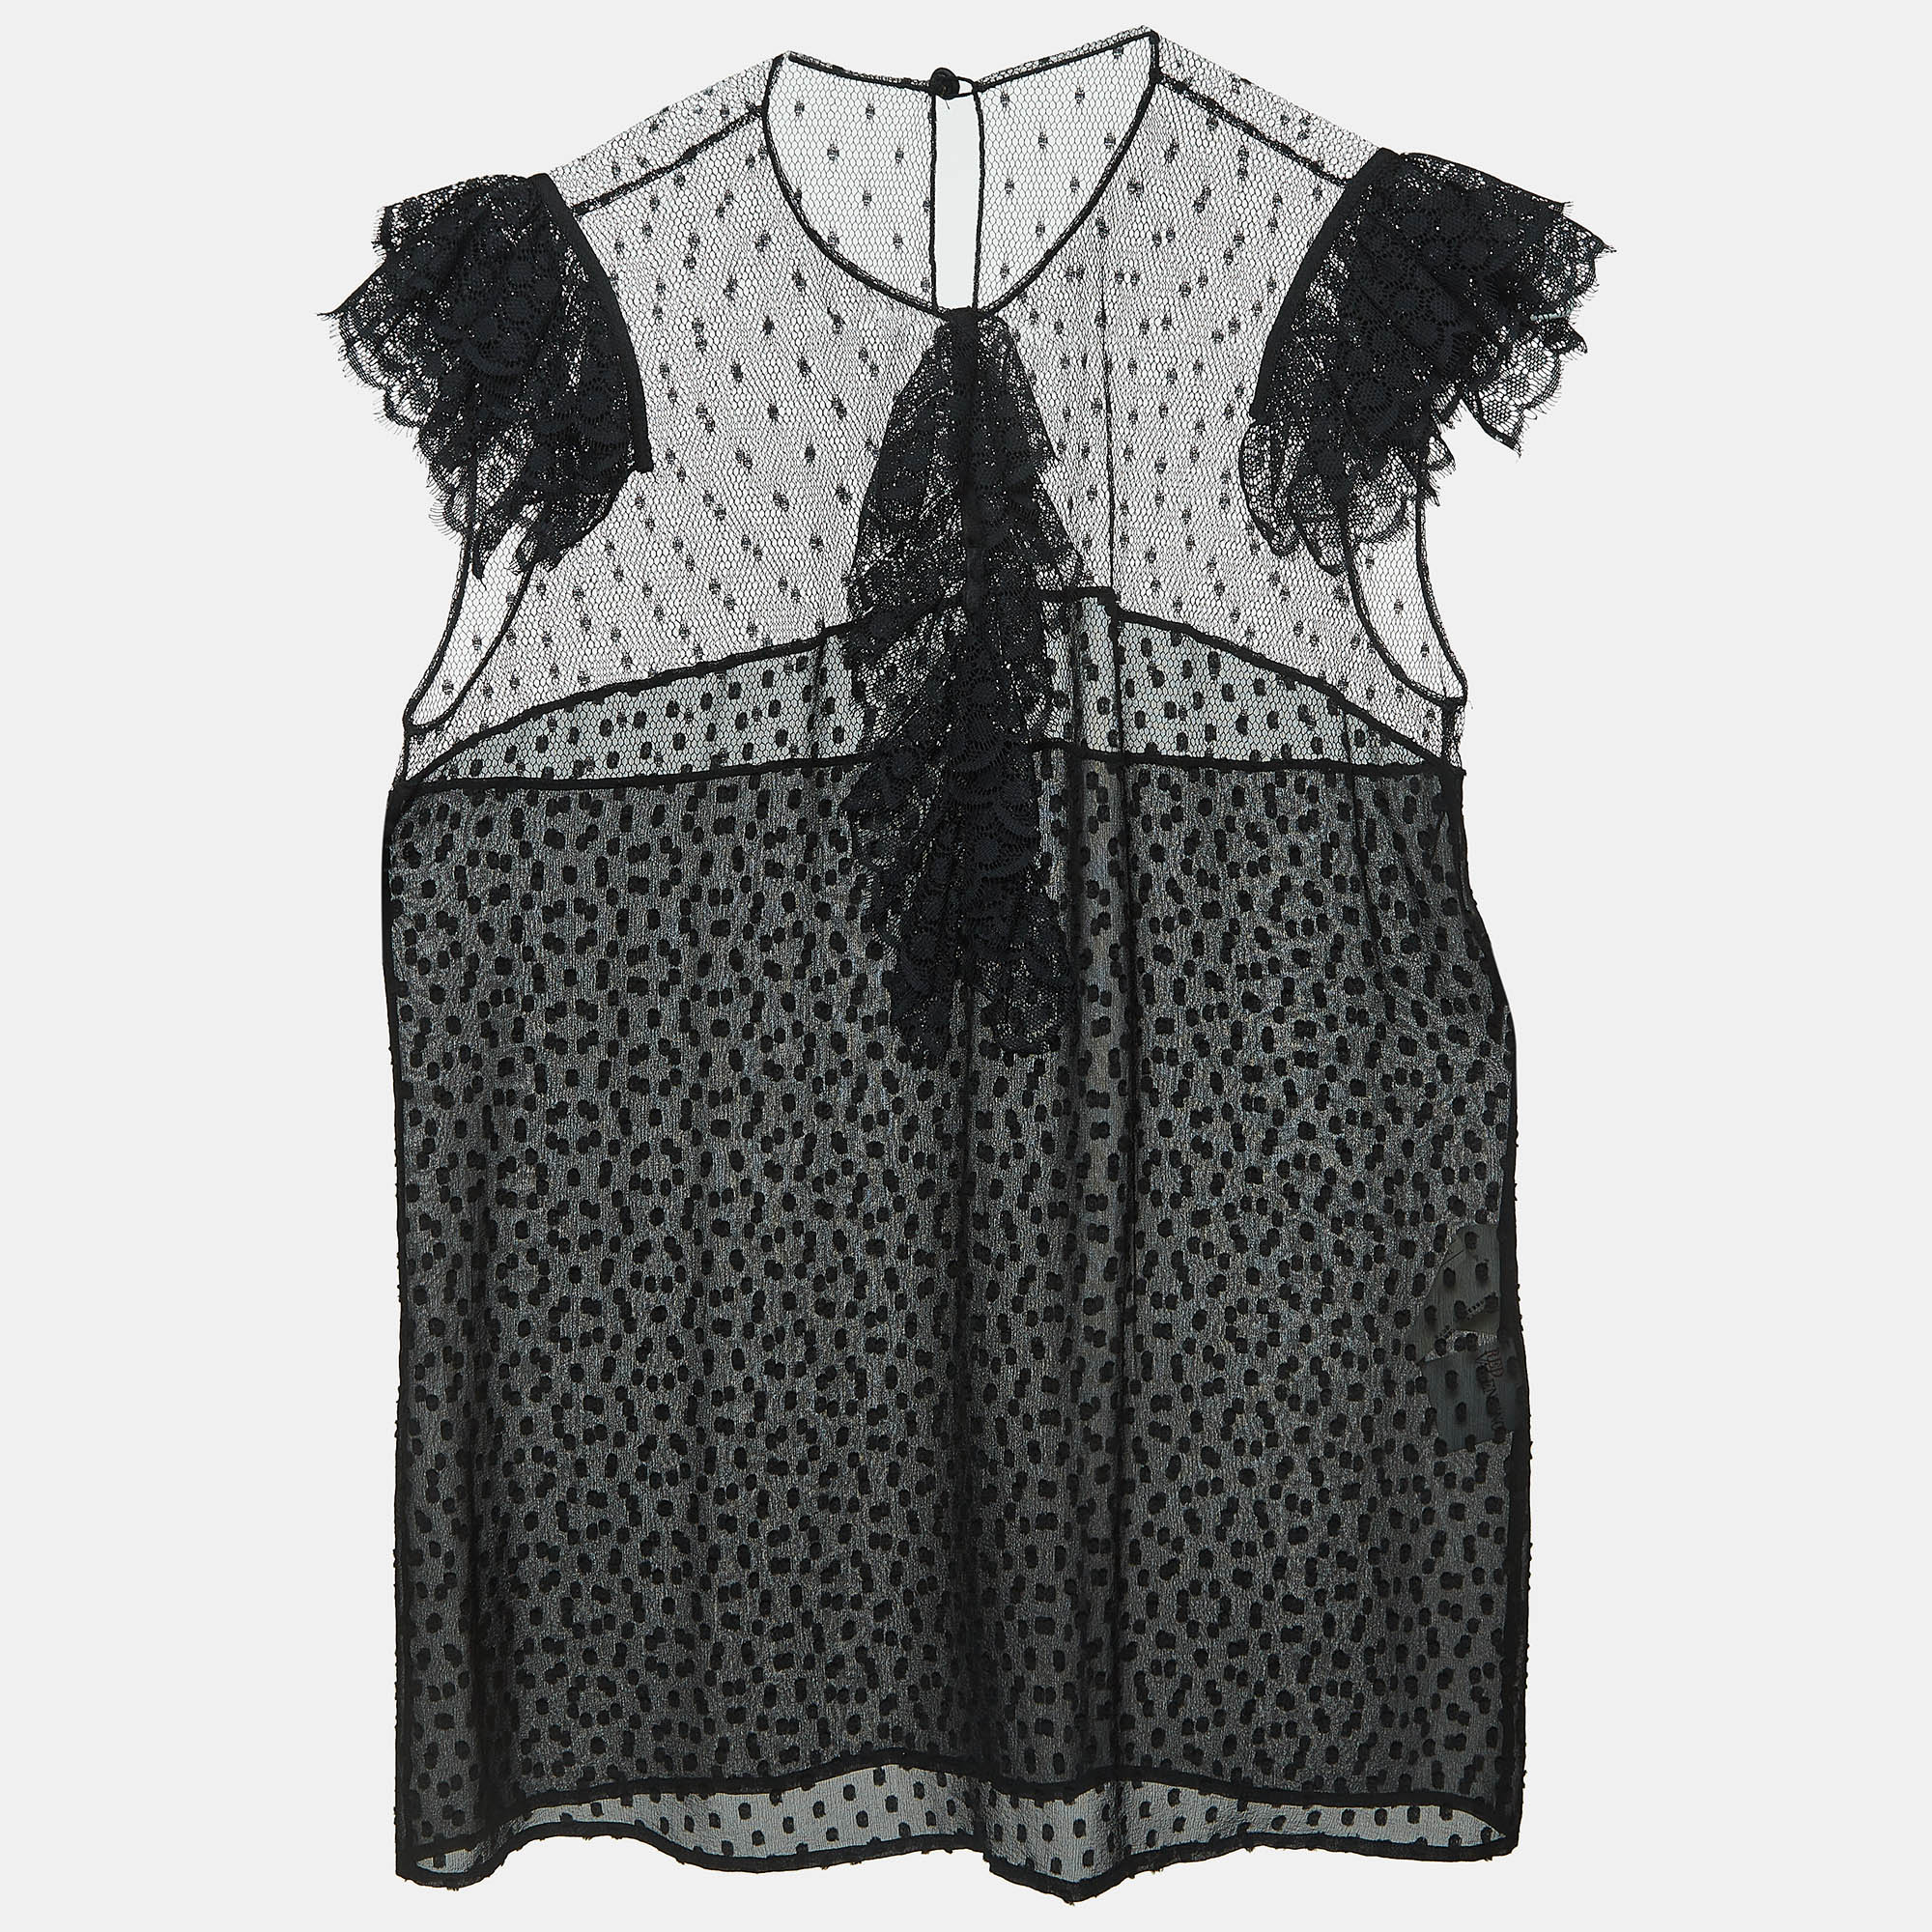 RED Valentino Black Dotted Chiffon Lace Trimmed Top M